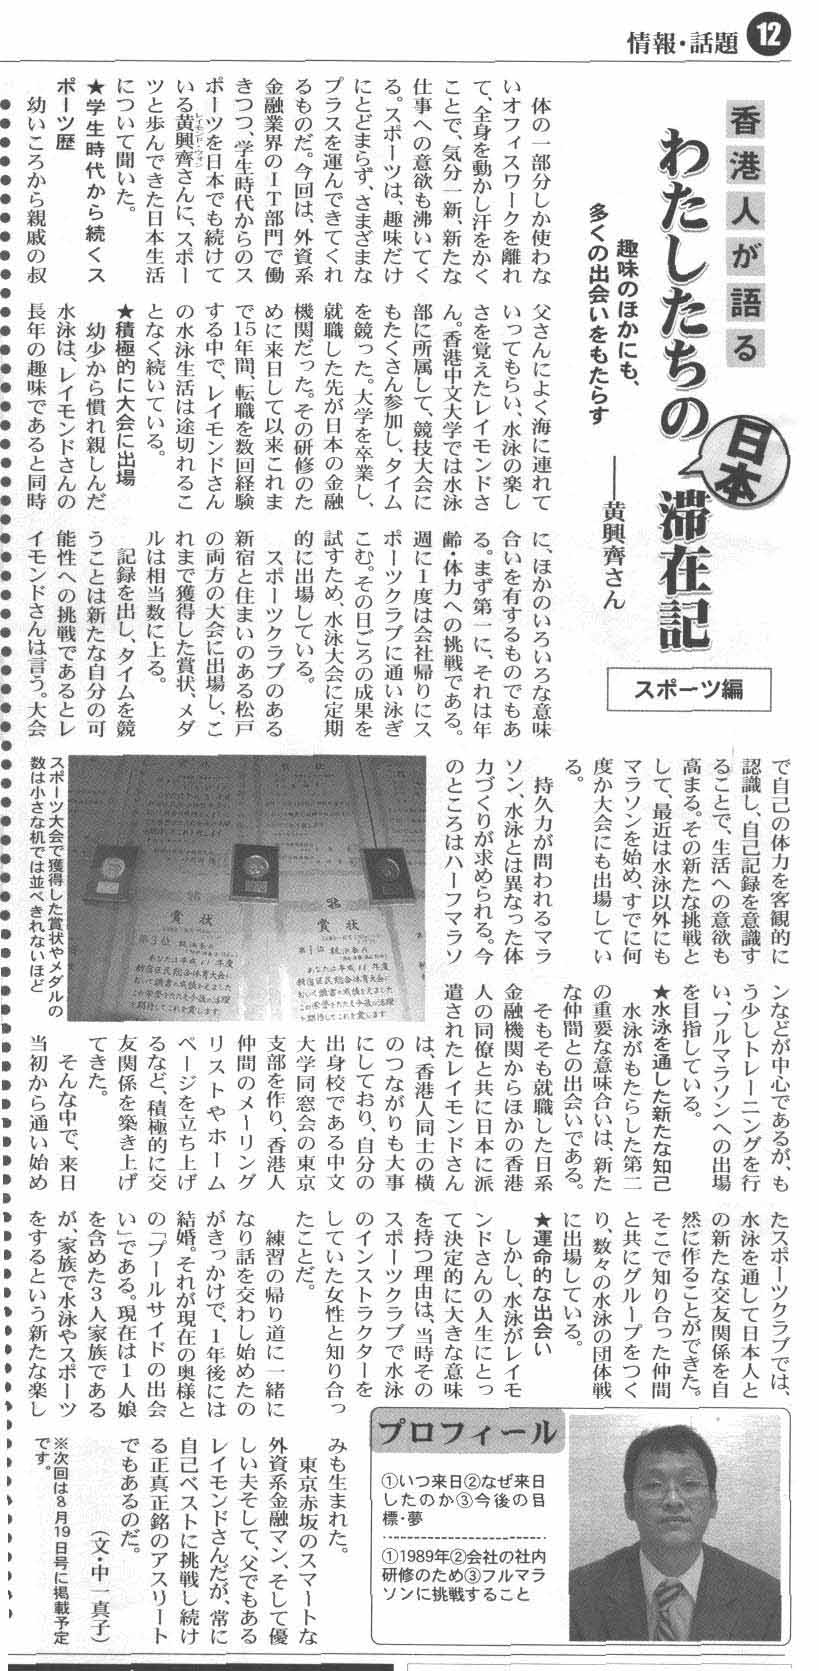 Interview of Raymond Wong by Weekly Hong Kong on Jul 15, 2004